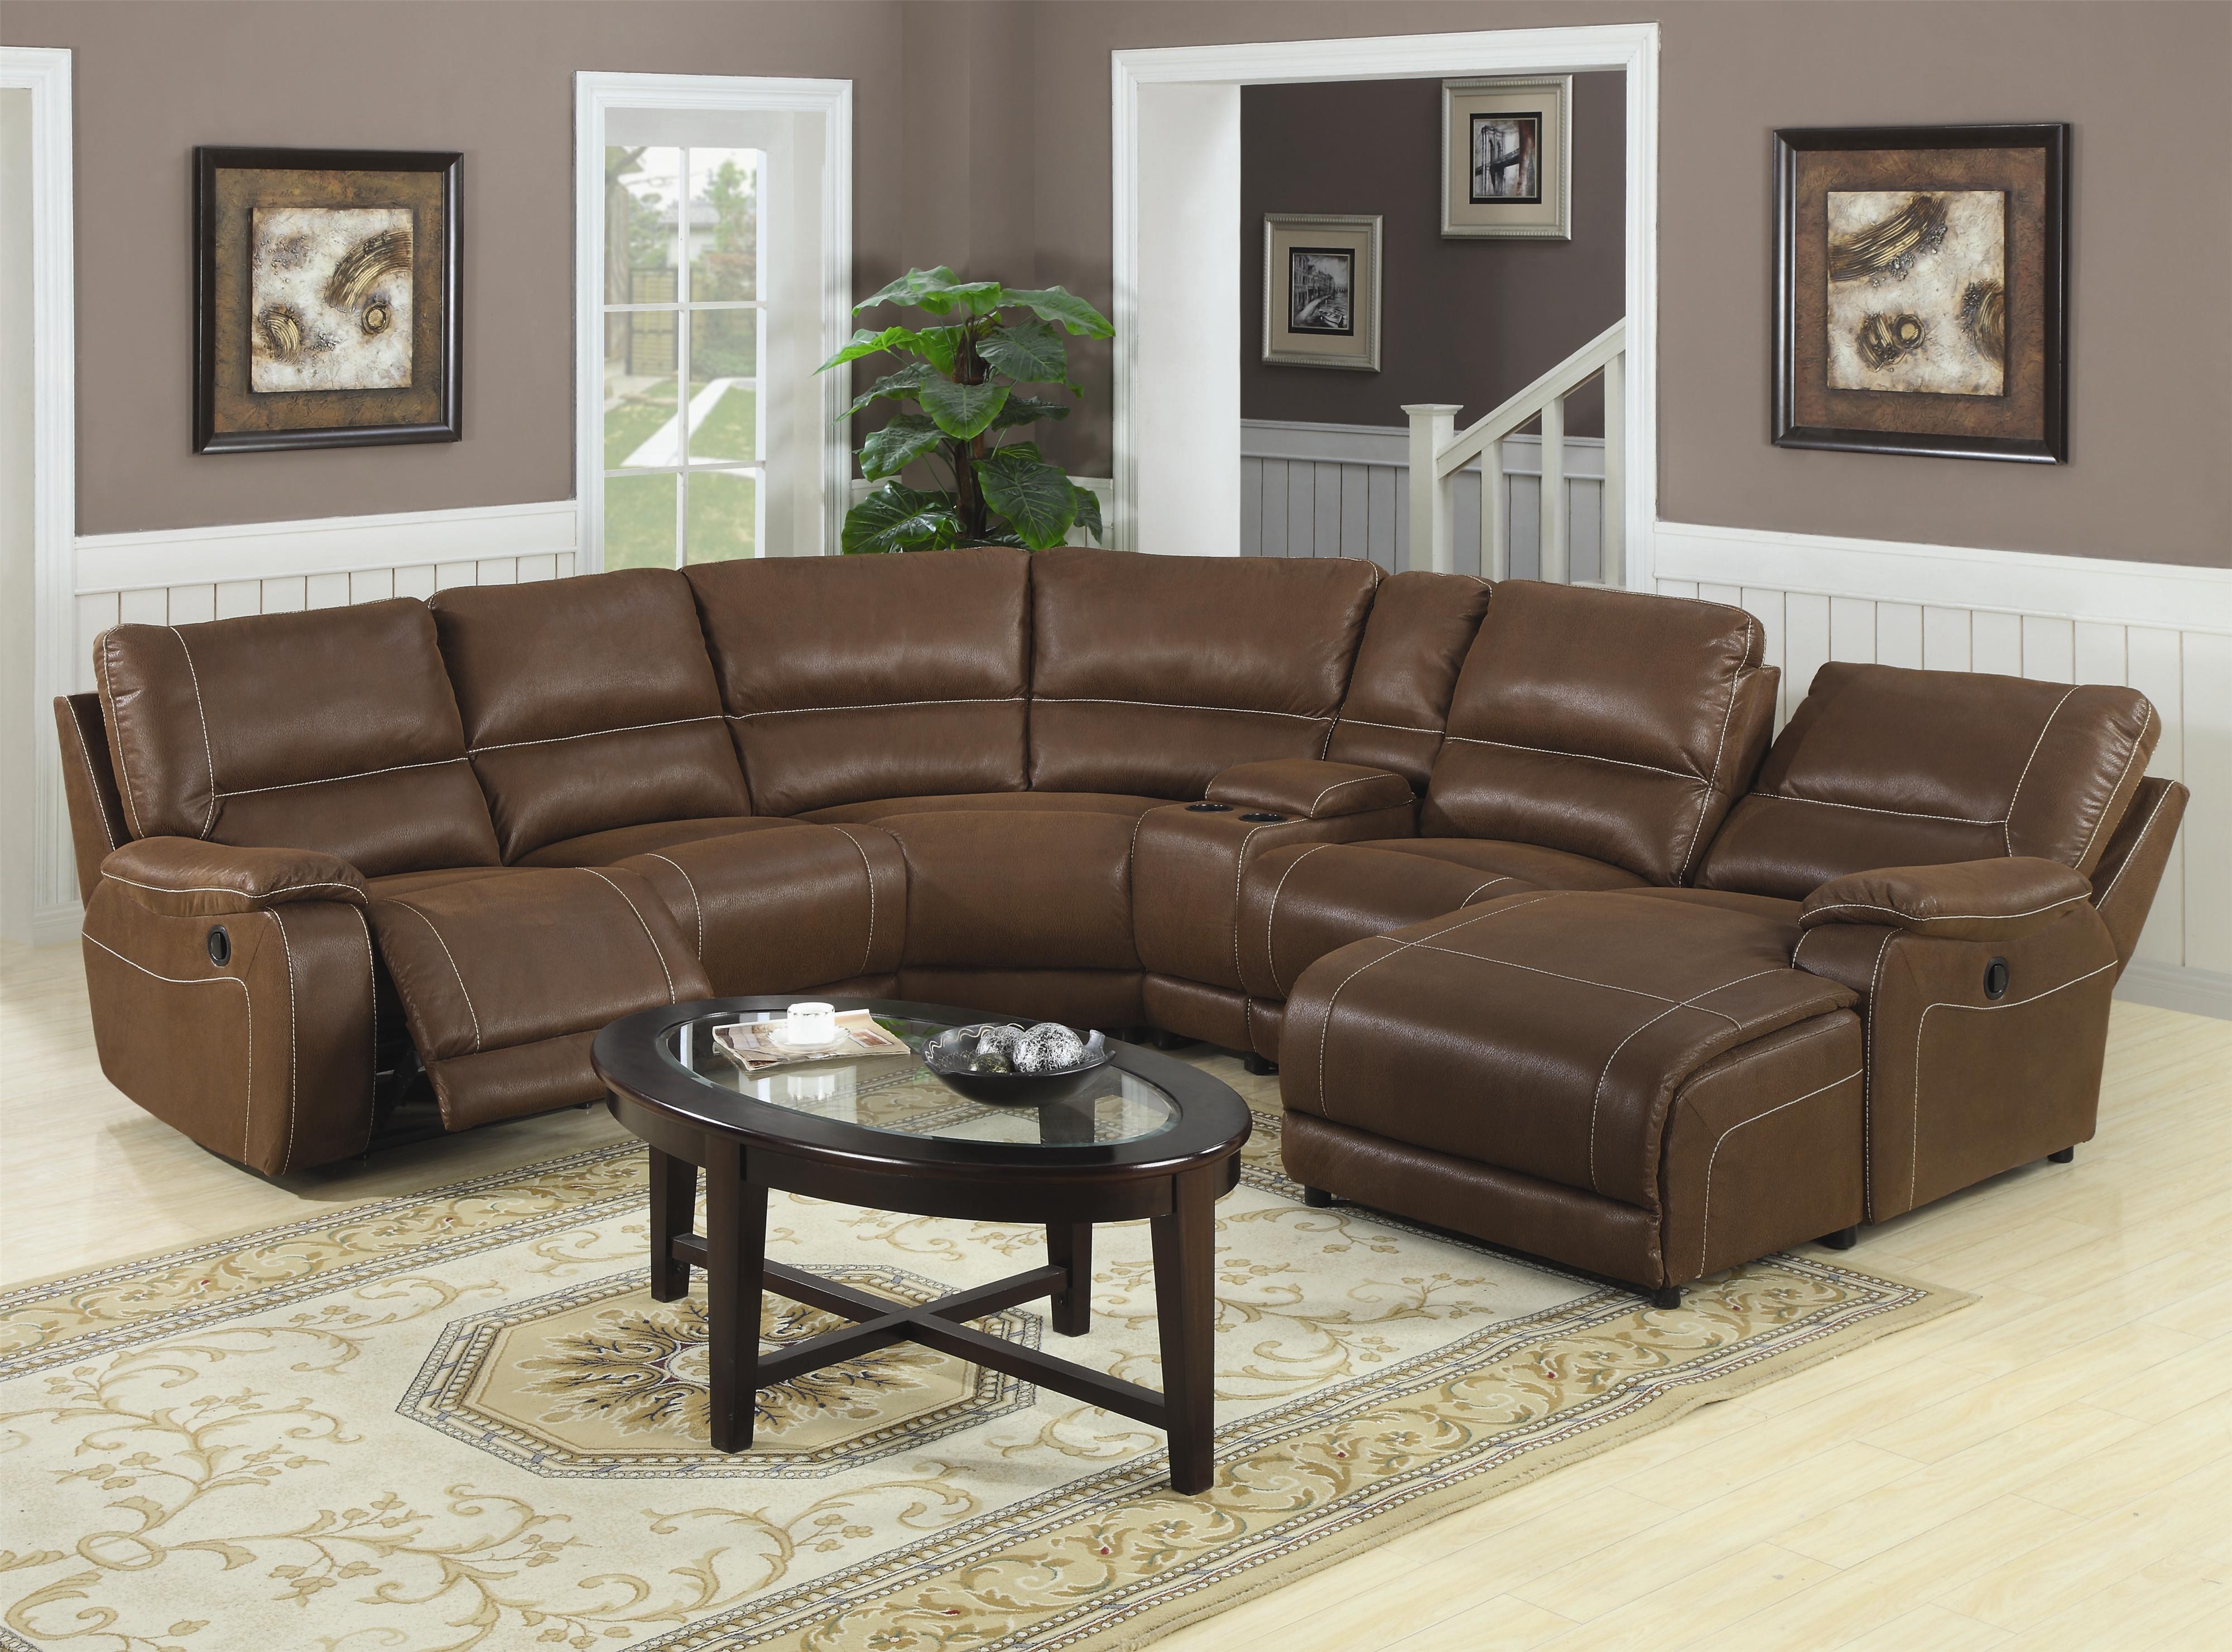 Sectional Reclining Sofas | Recliner Sectional Sofas Small Space | Leather Sectional  Sofas with Recliners and